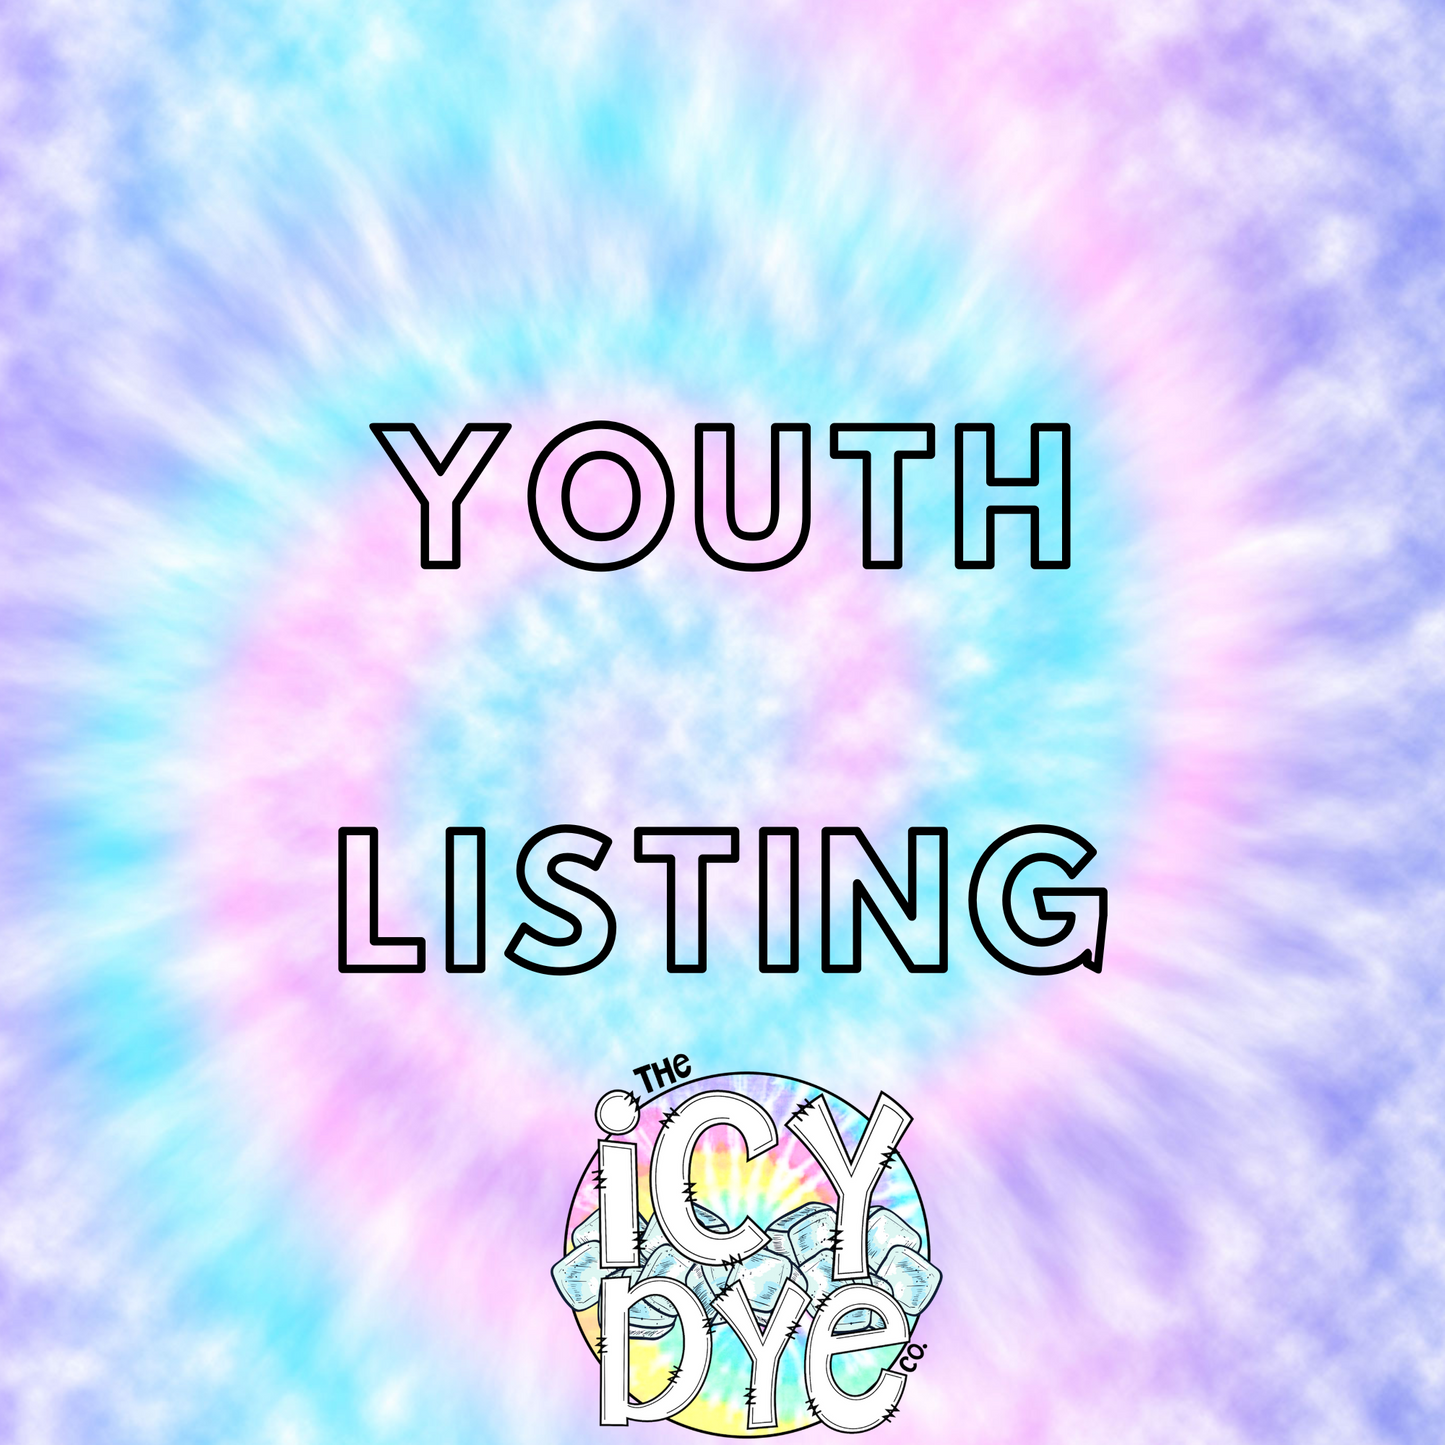 YOUTH LISTING